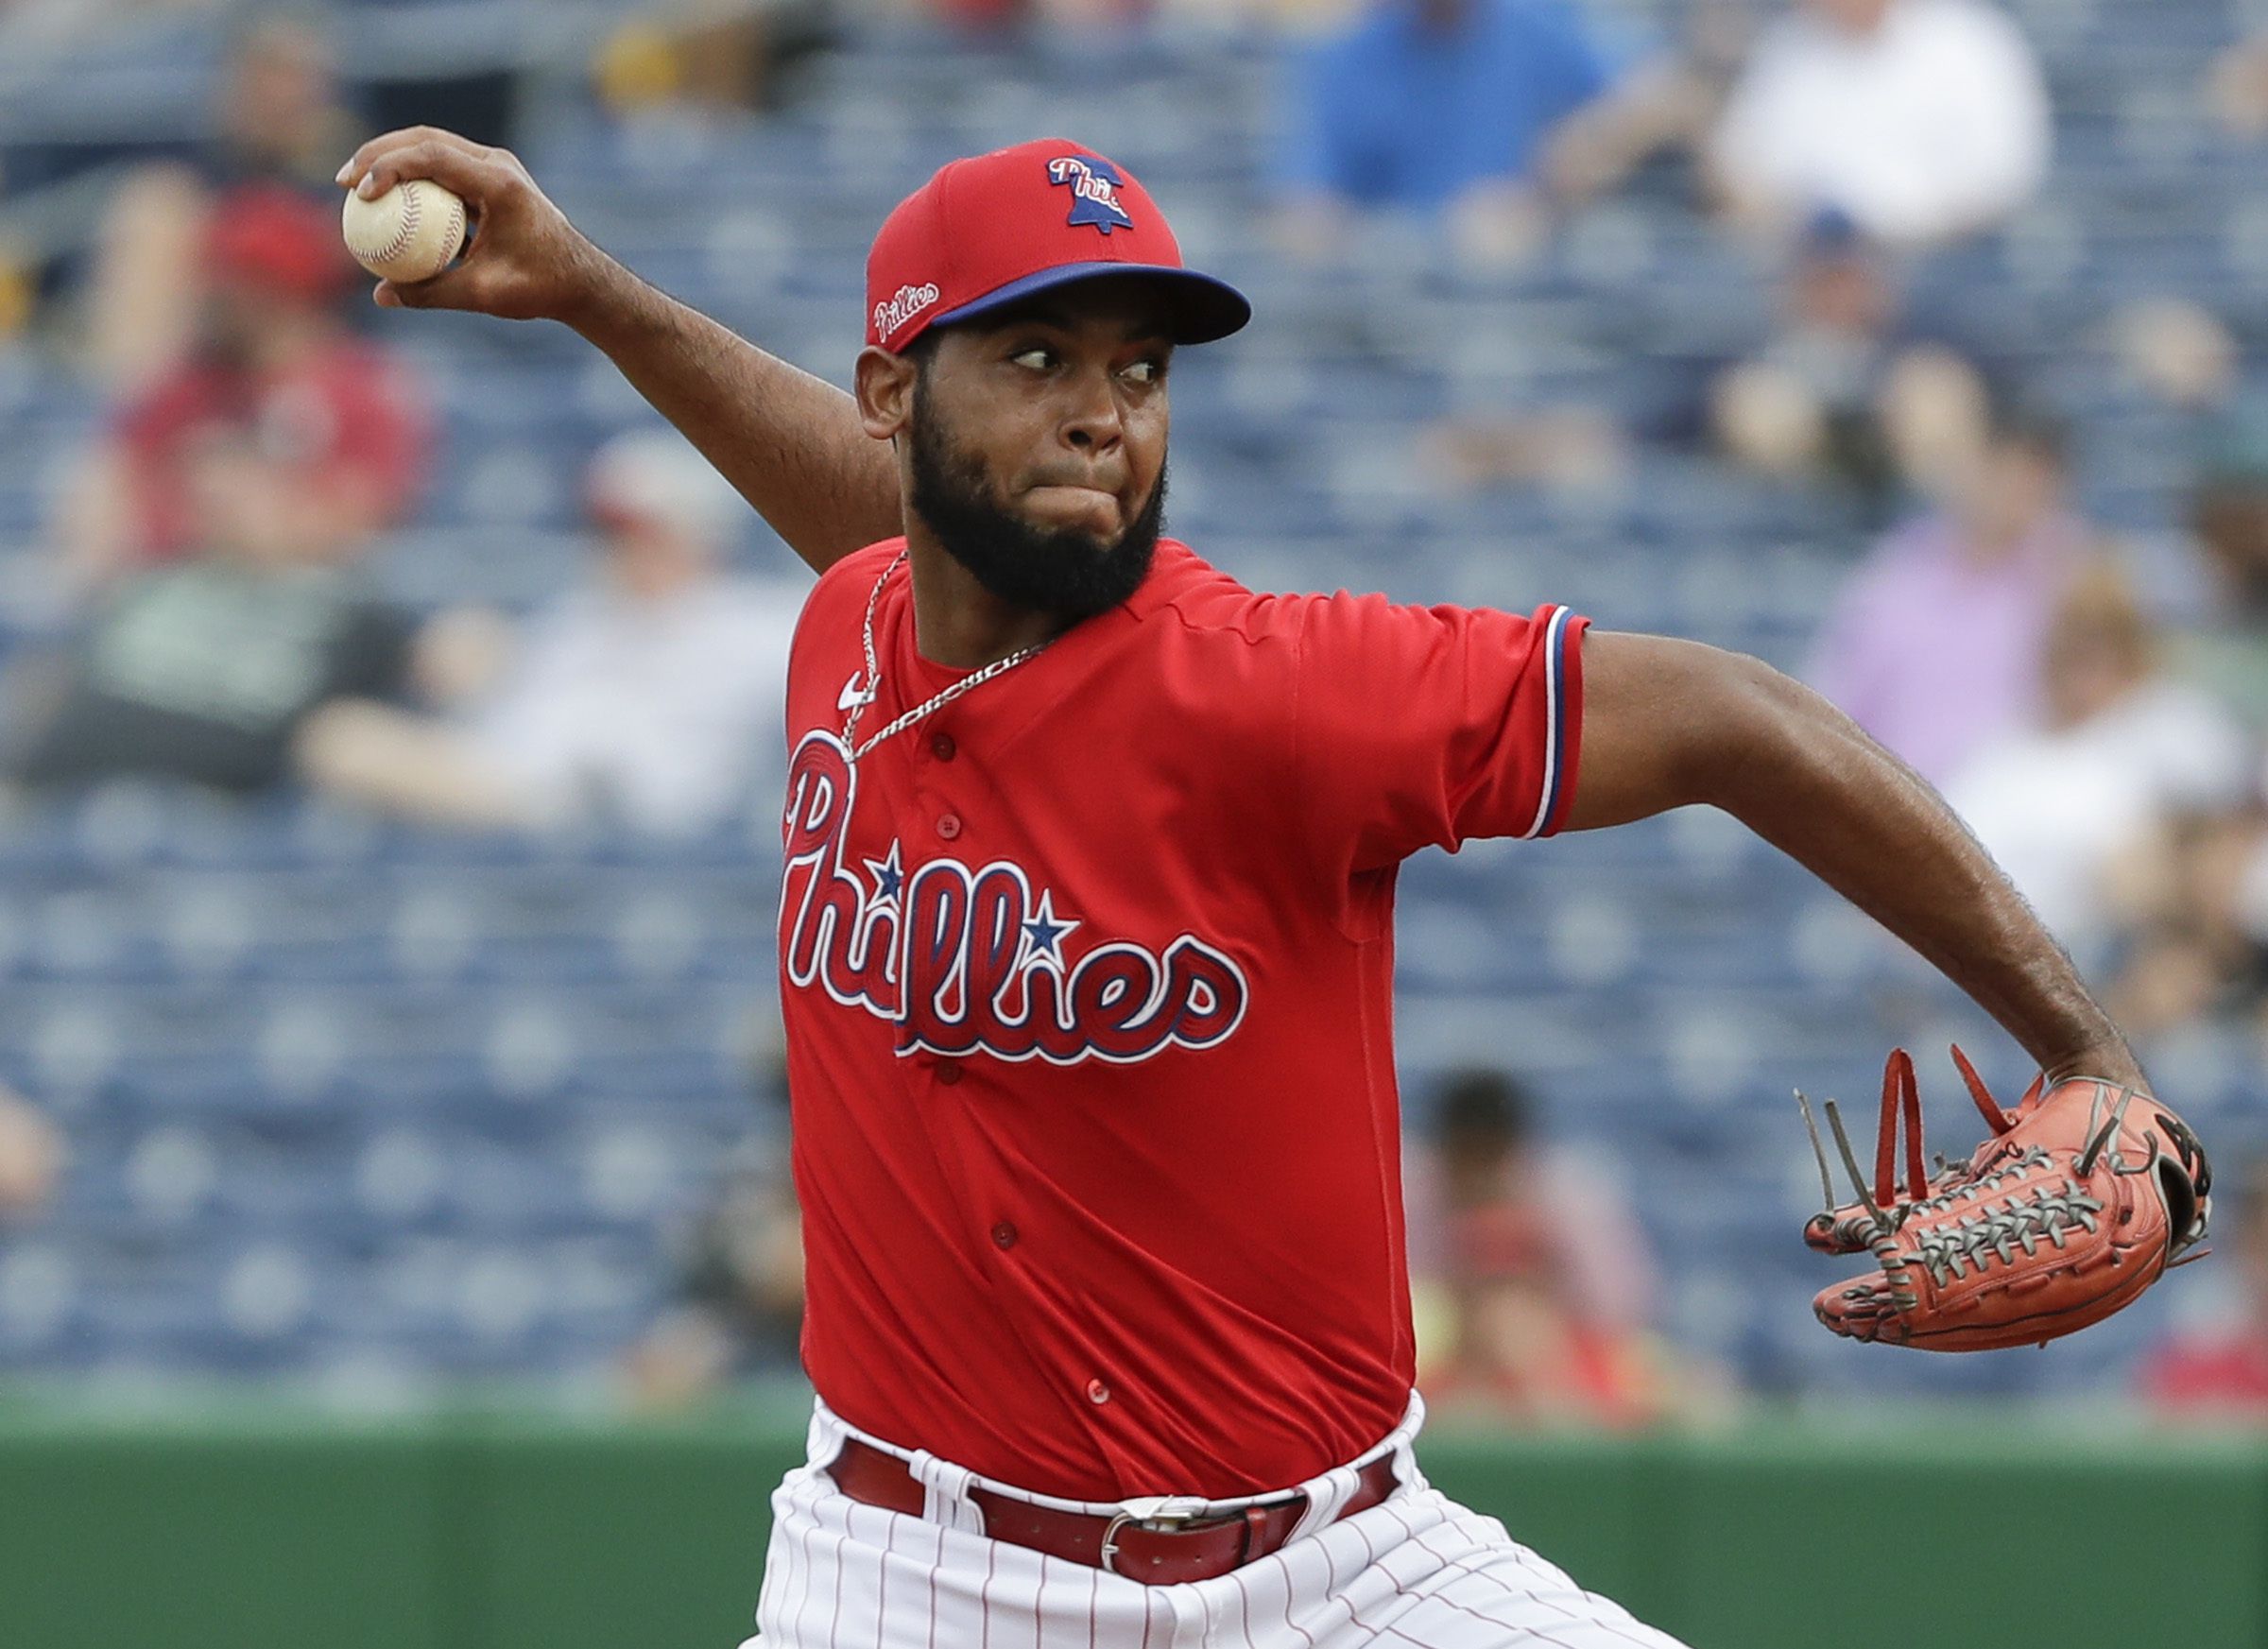 Phillies Seranthony Dominguez after spring debut: 'I'm ready